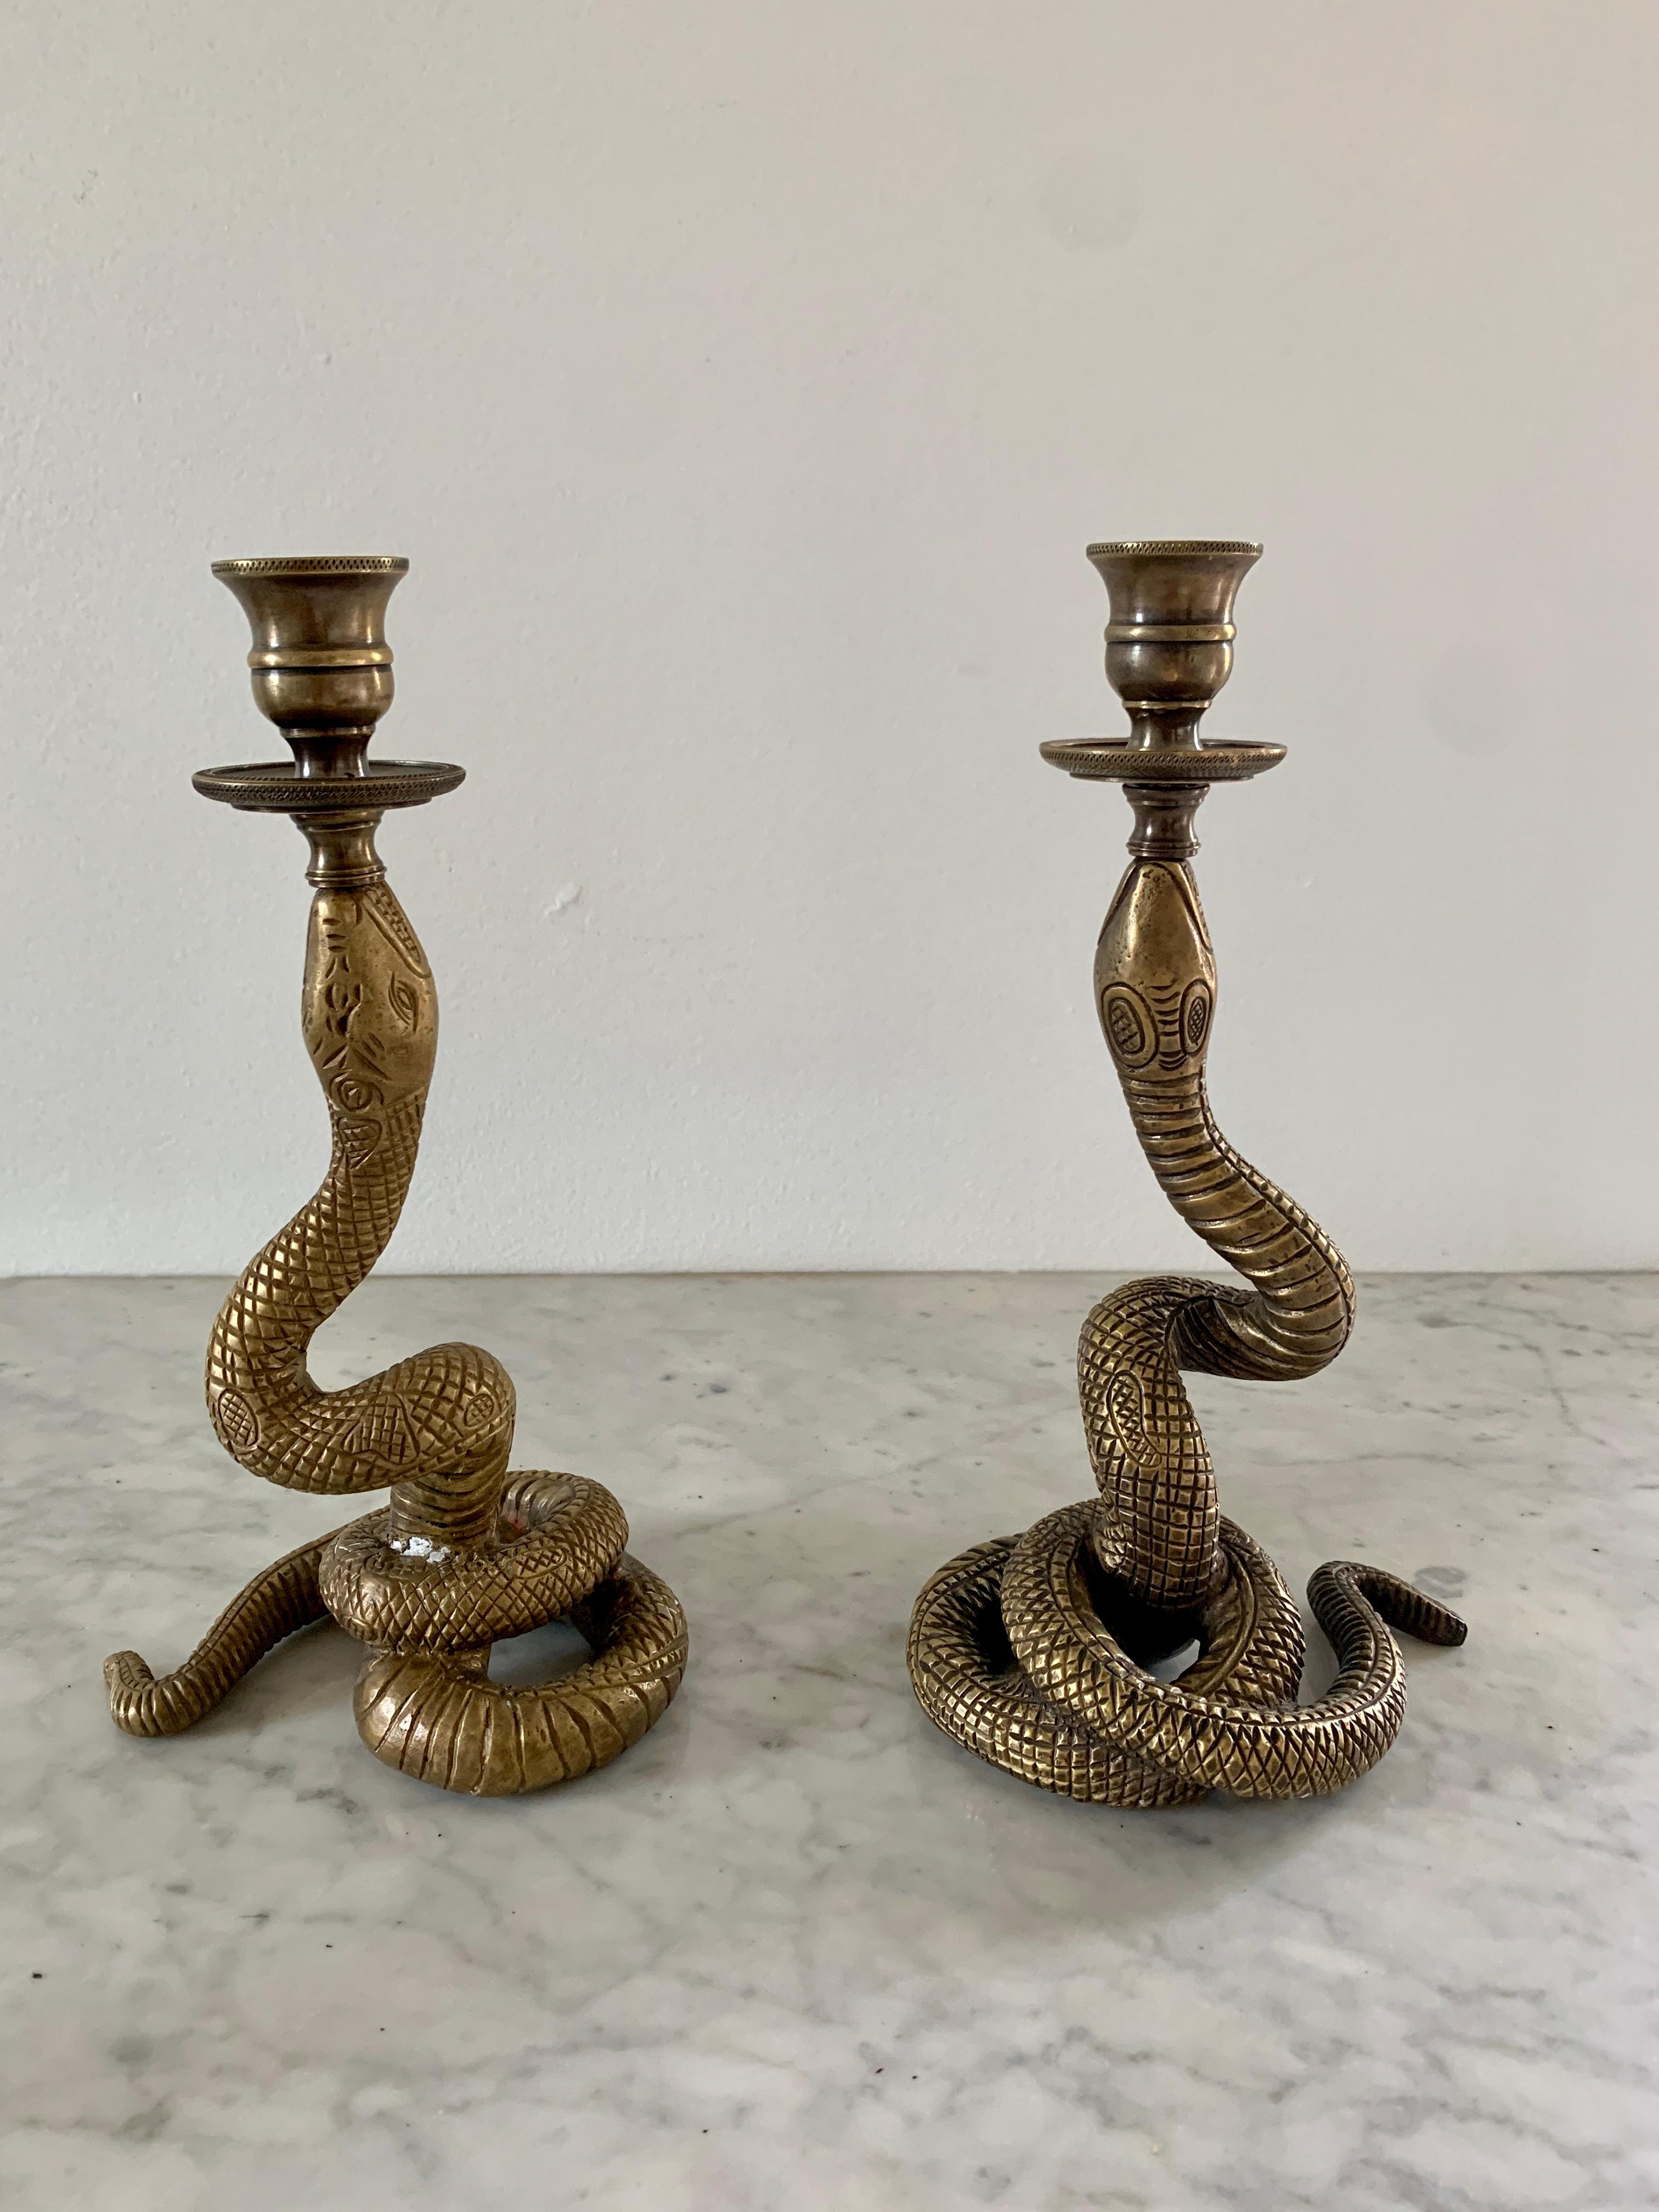 Vintage Brass Serpent Snake Candle Holders, Pair 2